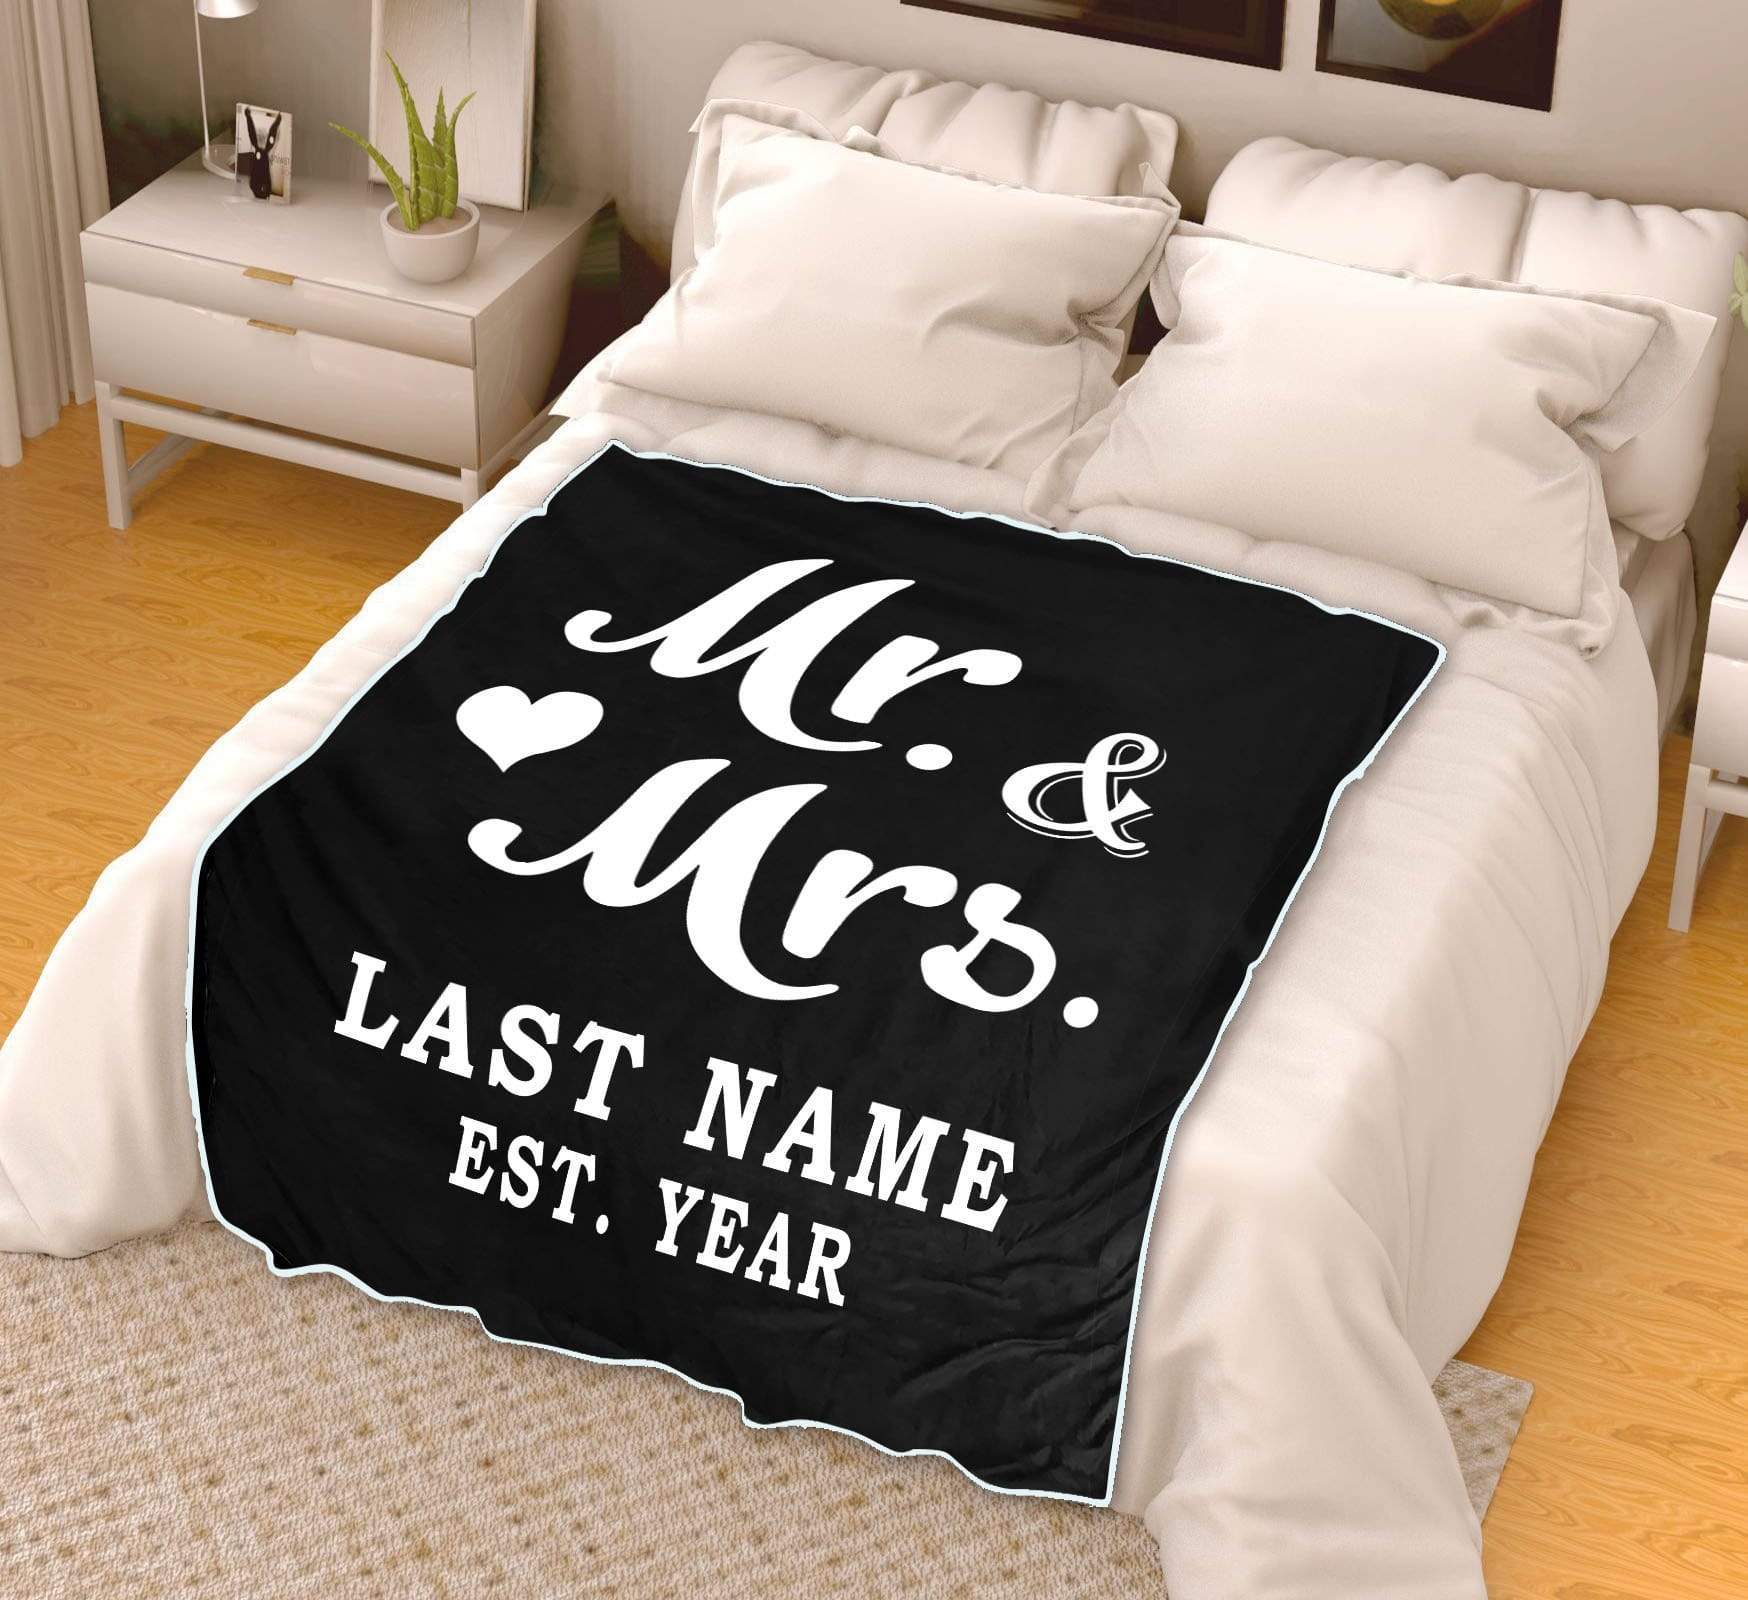 Mr And Mrs Personalized Blanket for Couples